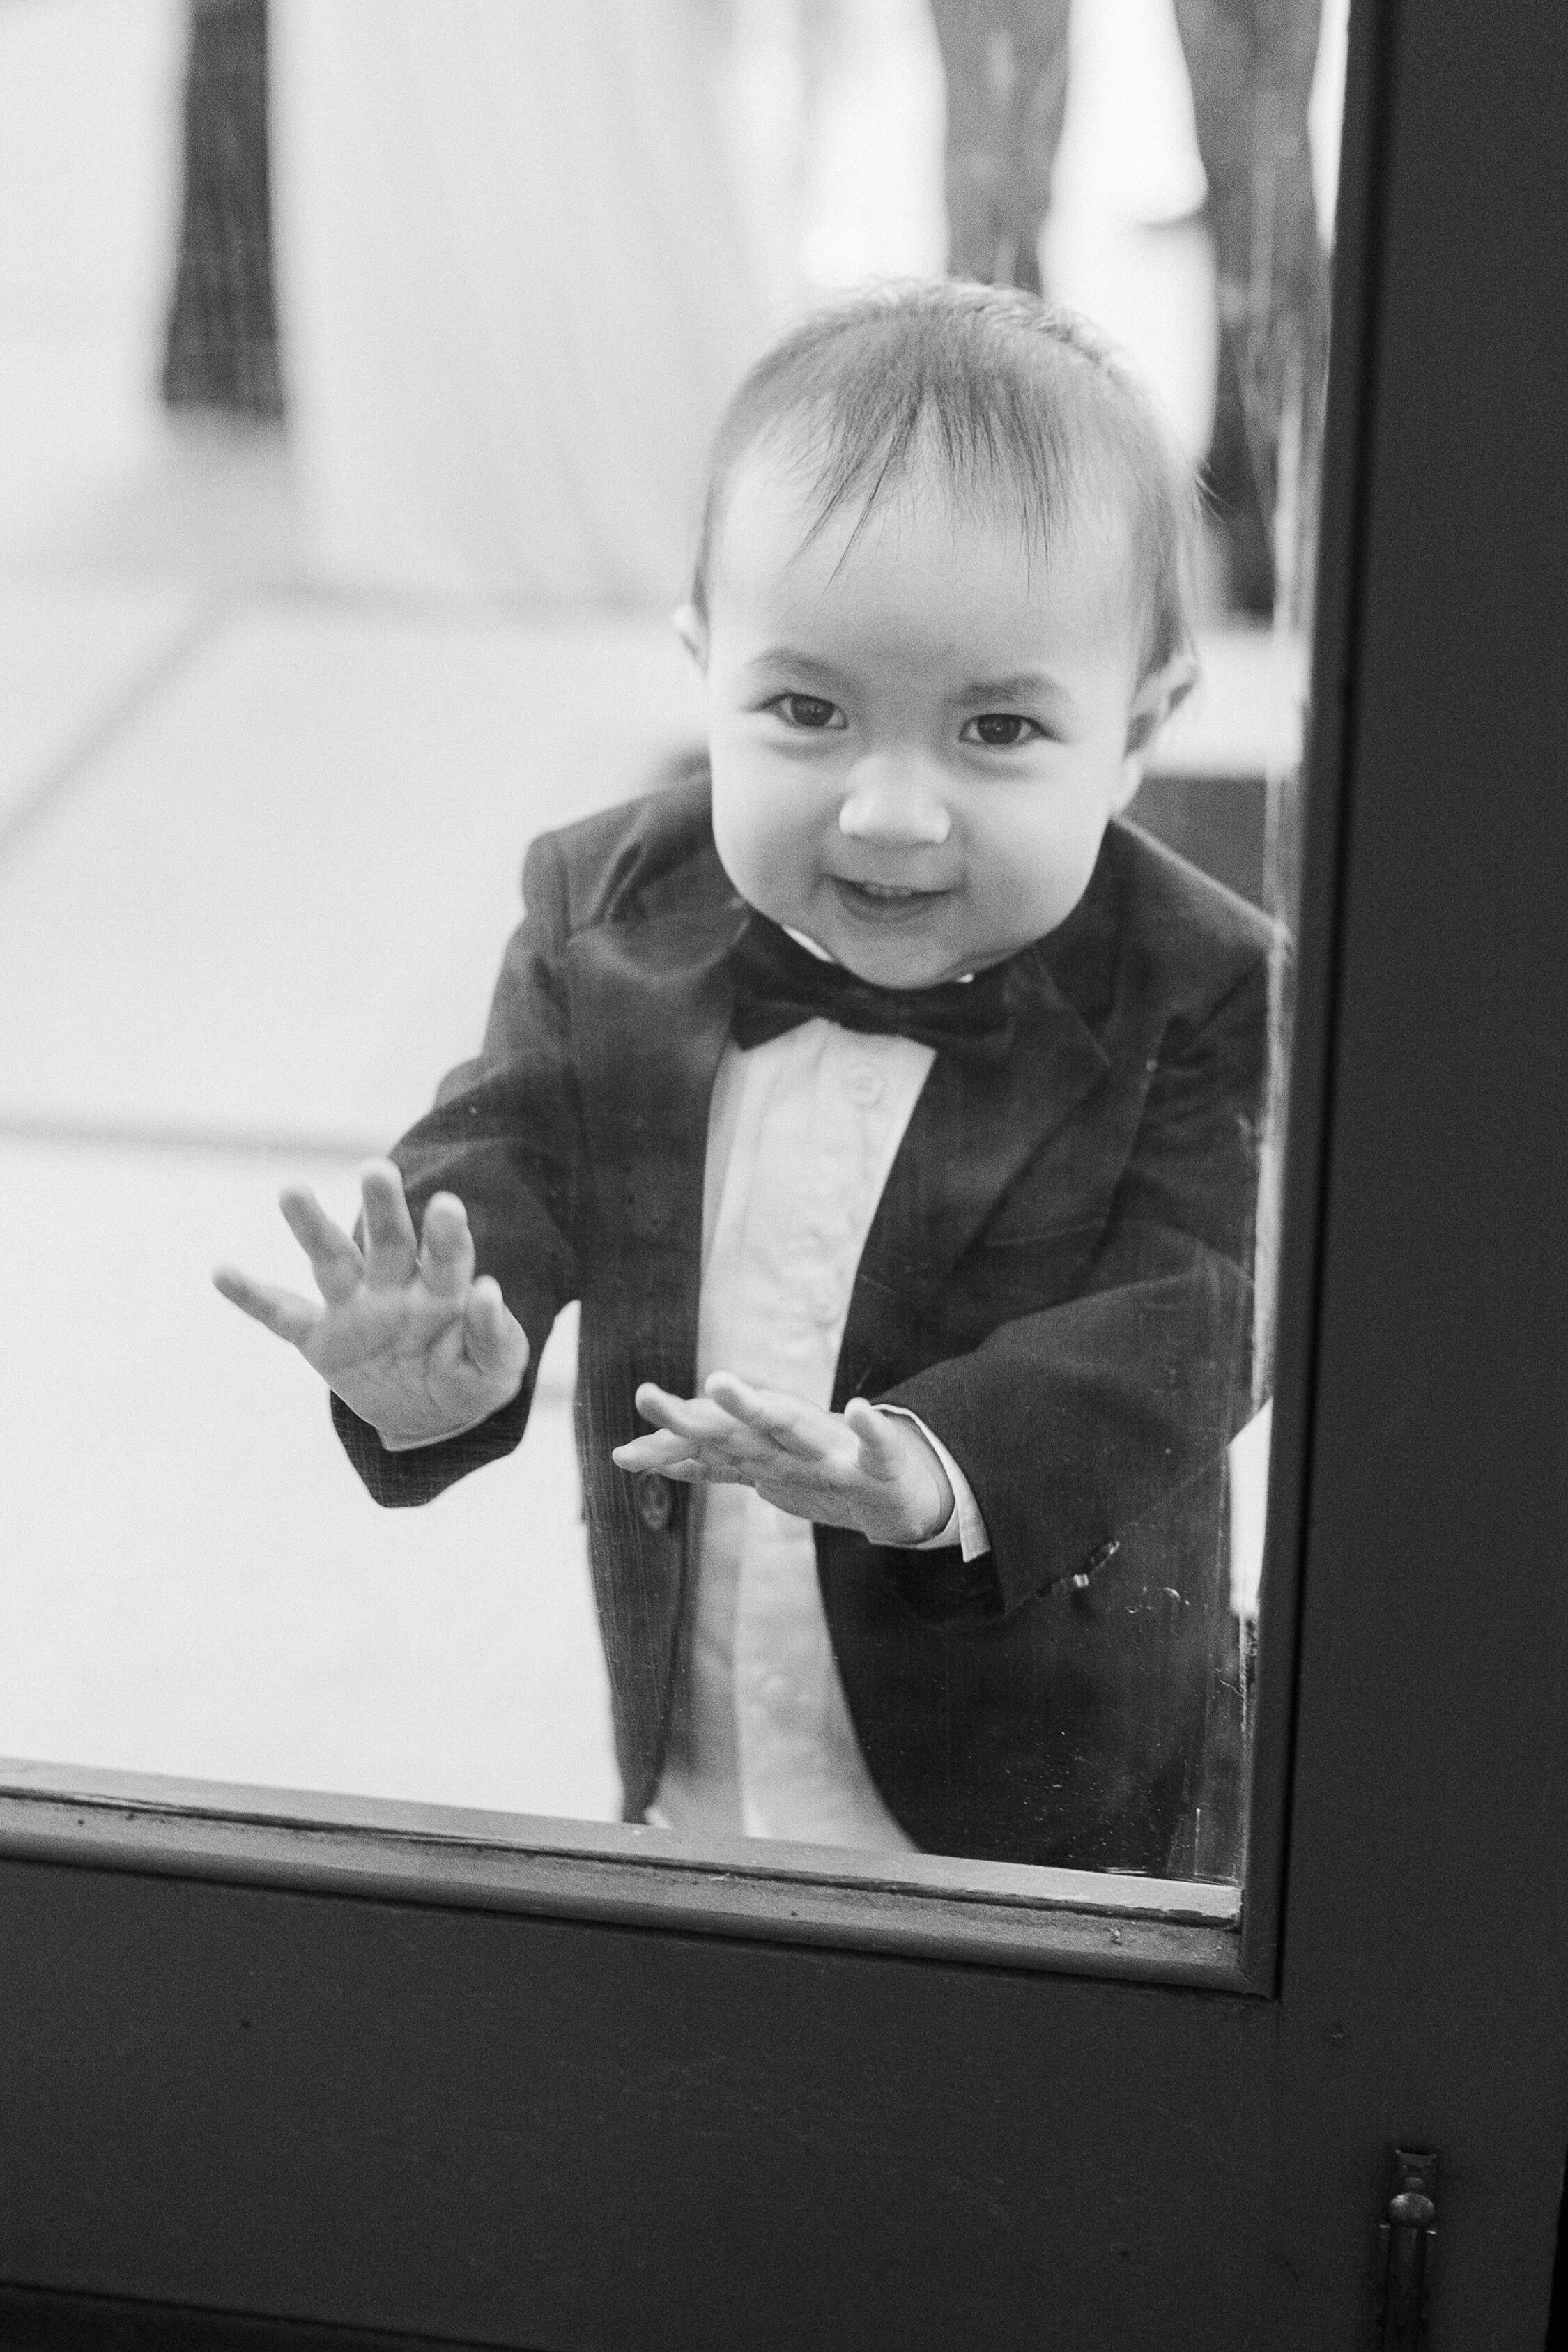 Adorable Ring Bearer in Vest and Bowtie